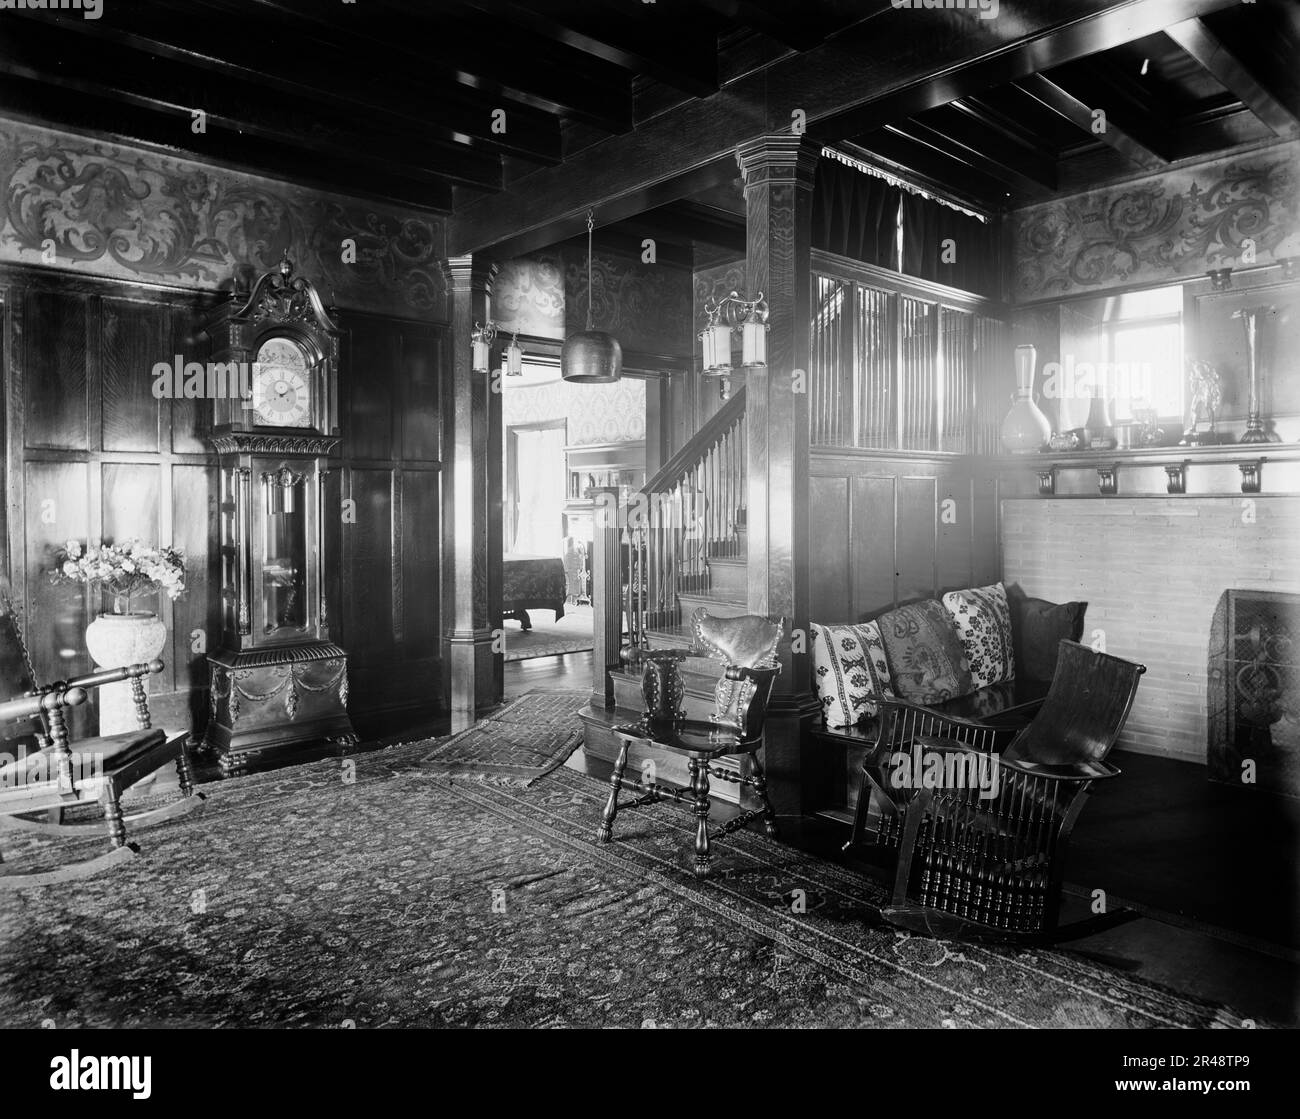 Residence of Dr. J.H. Lancashire, the hall and grandfather clock, Alma, Mich., between 1900 and 1910. Stock Photo